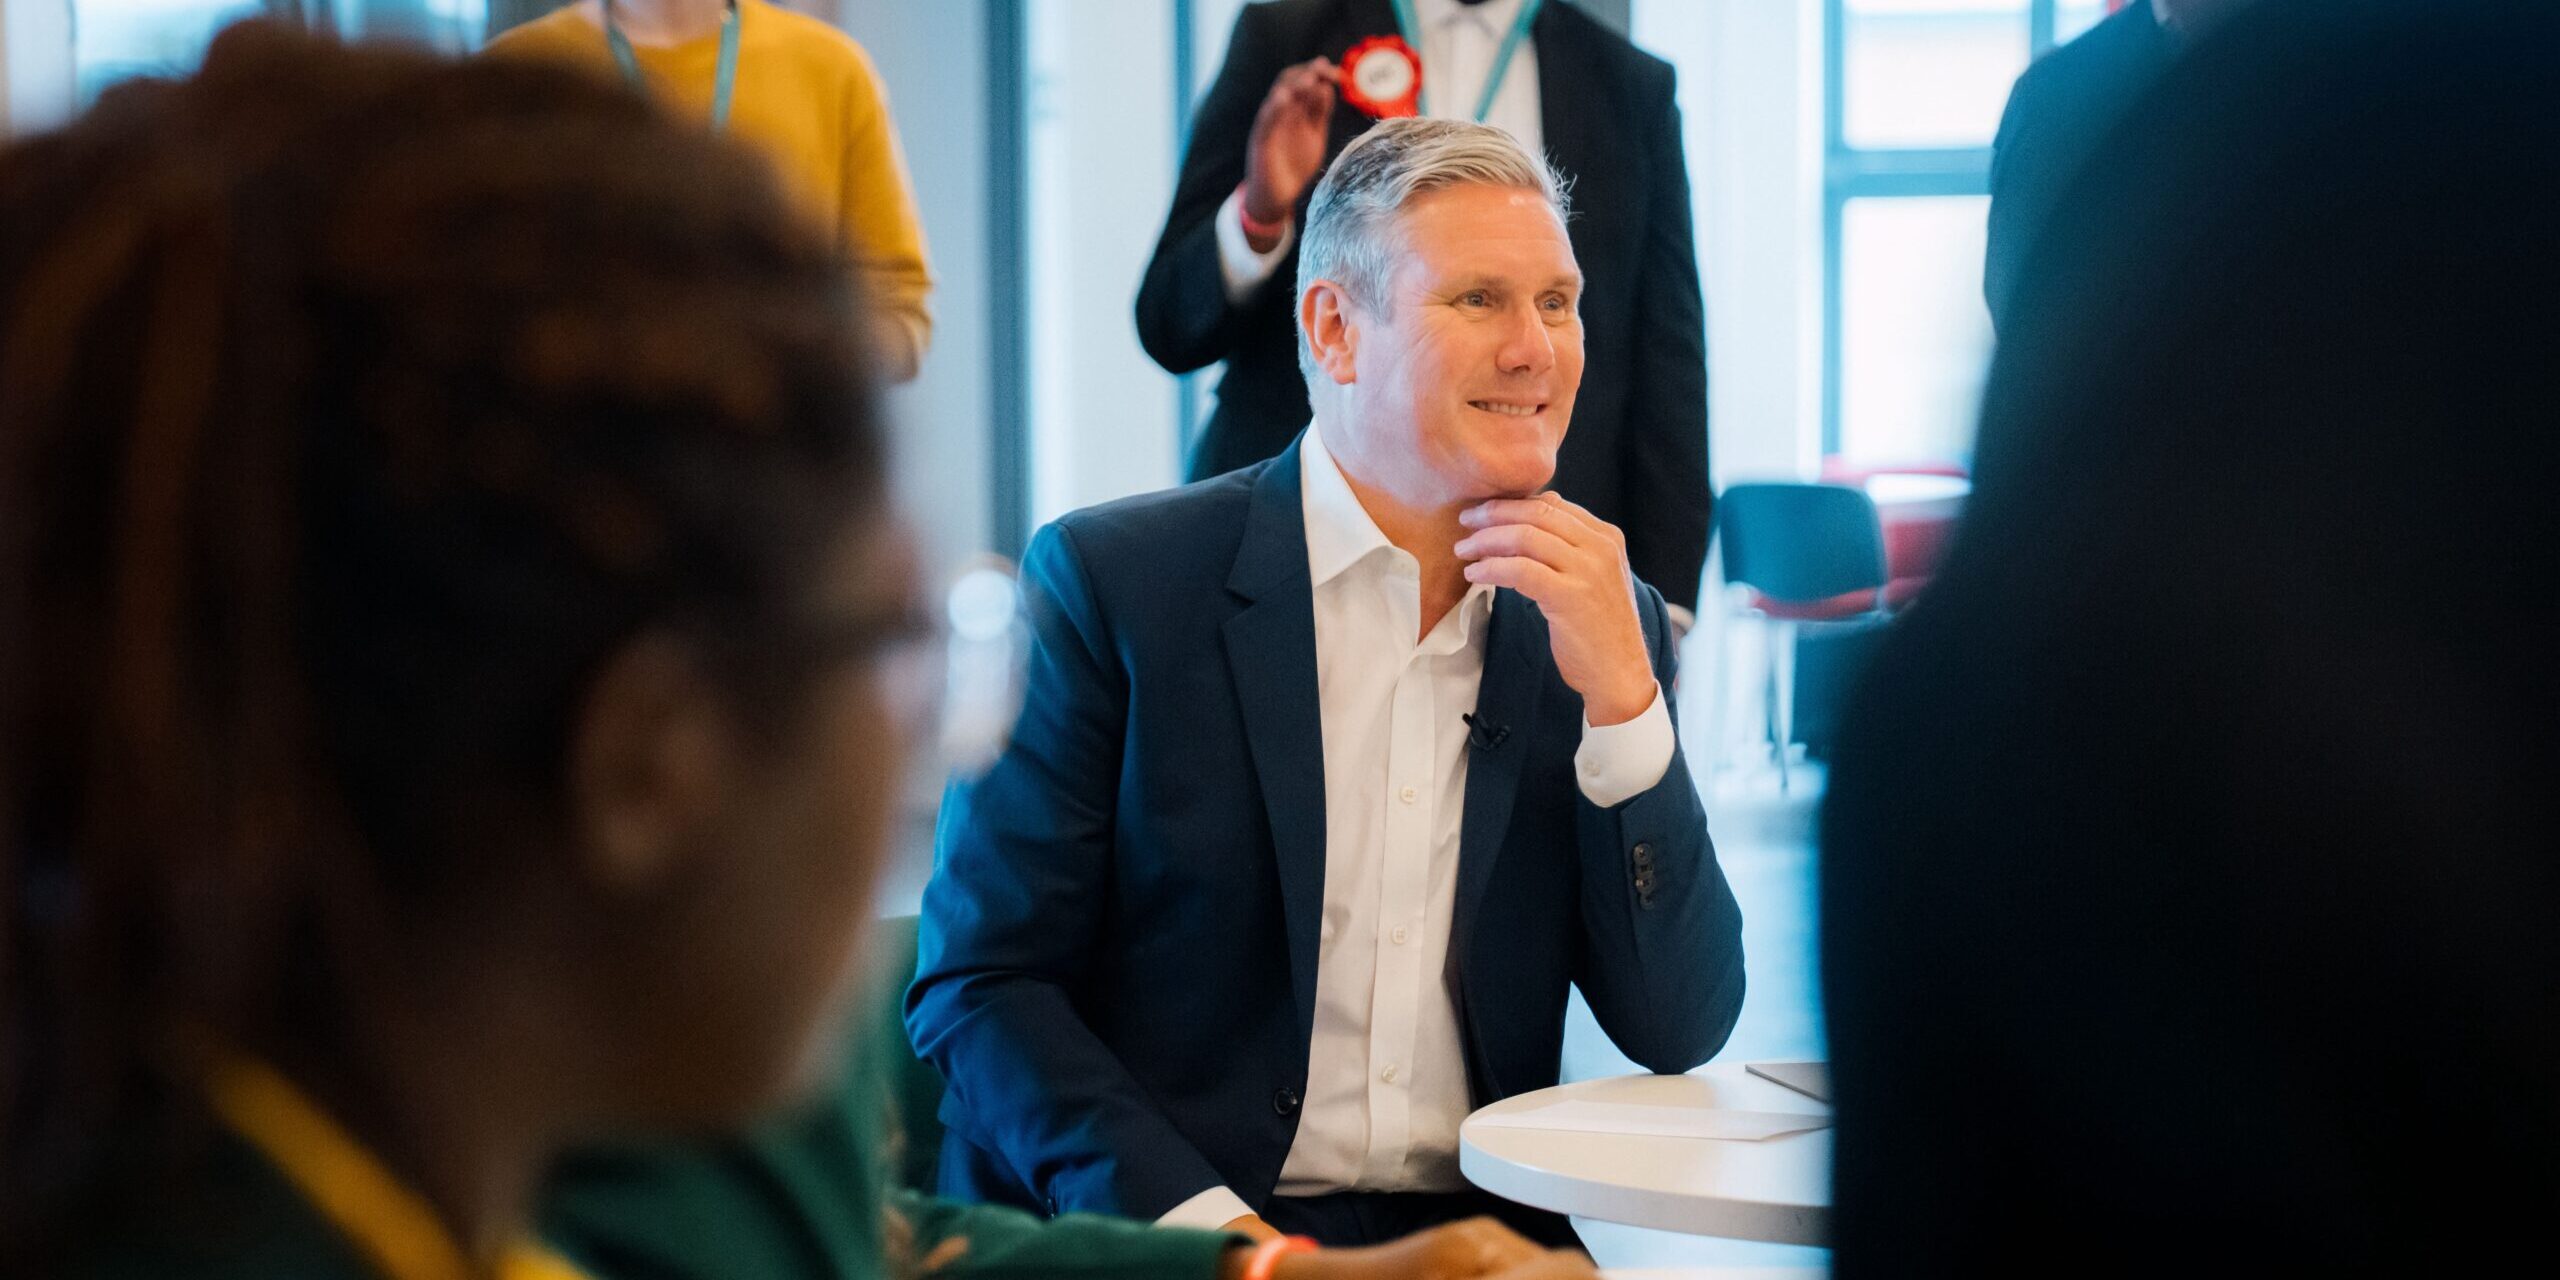 Watch: Keir Starmer on how his working-class background influences his approach to changing politics